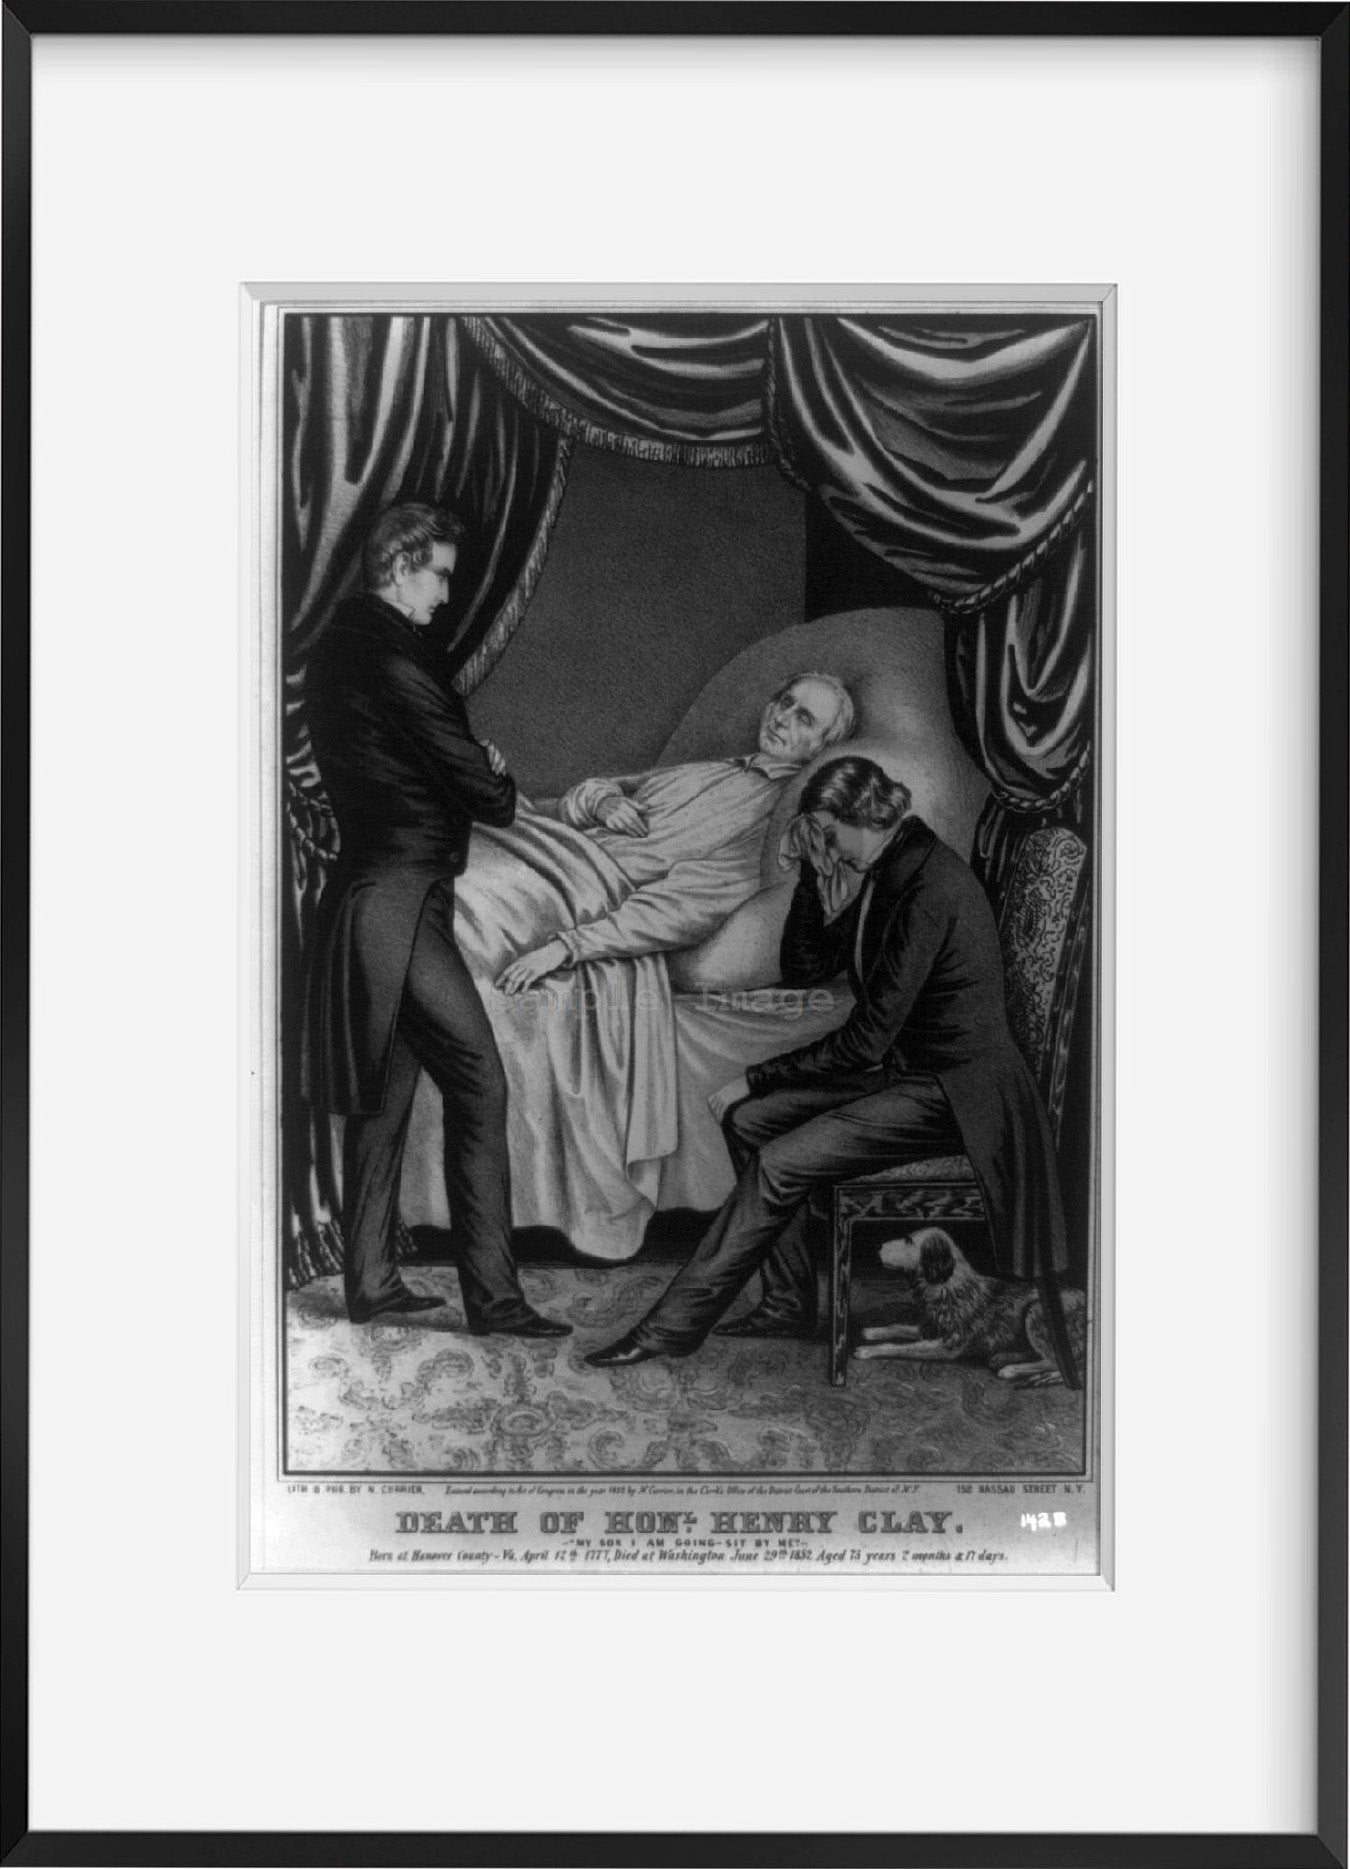 1852 Photo Death of Honl. Henry Clay: "My son i am going-sit by me"